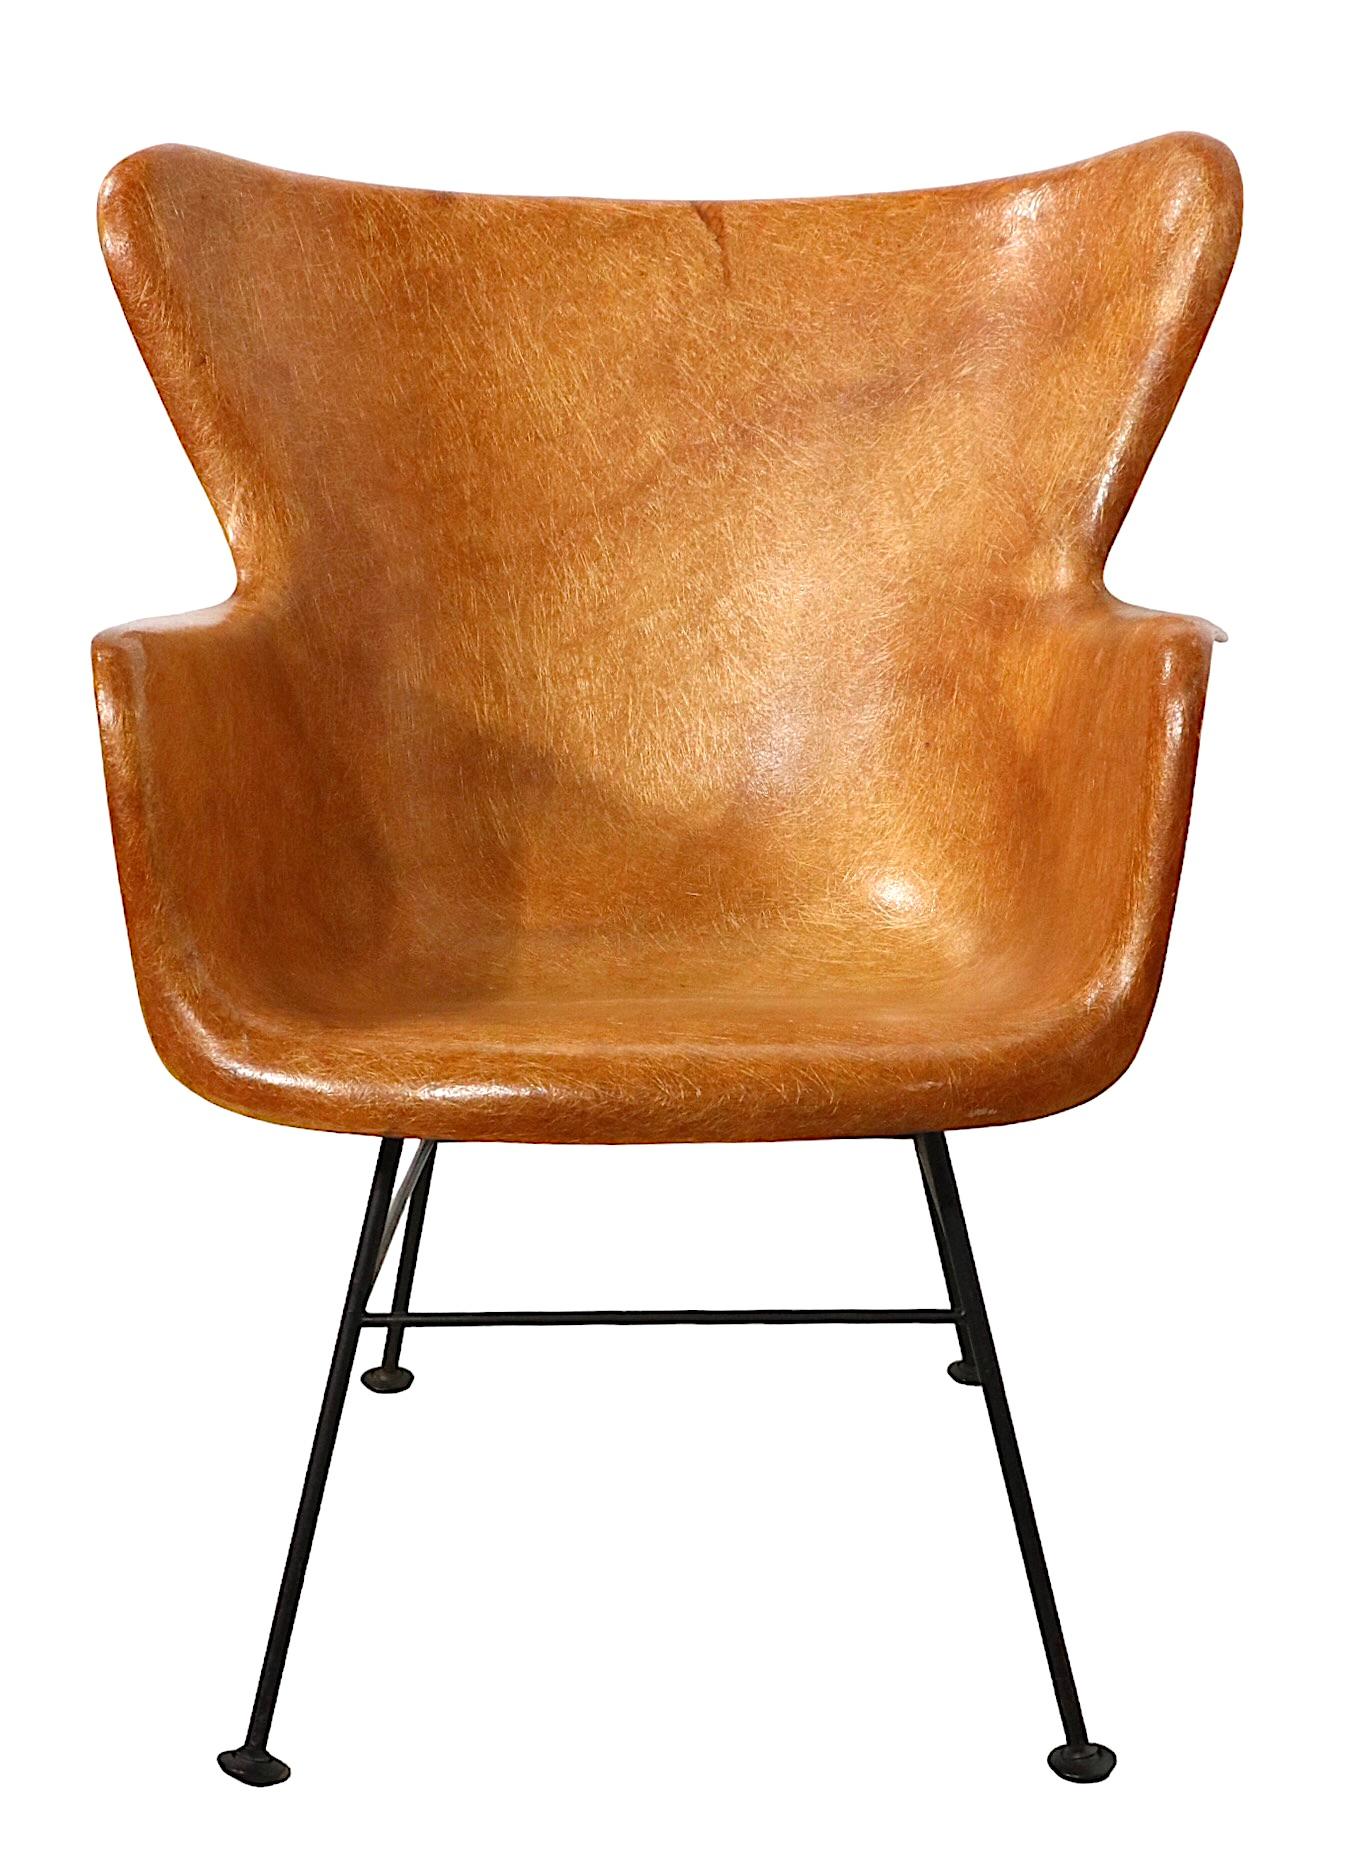 Iconic Mid Century Fiberglass Wingback Chair by Peabody for Selig, circa 1950s For Sale 3